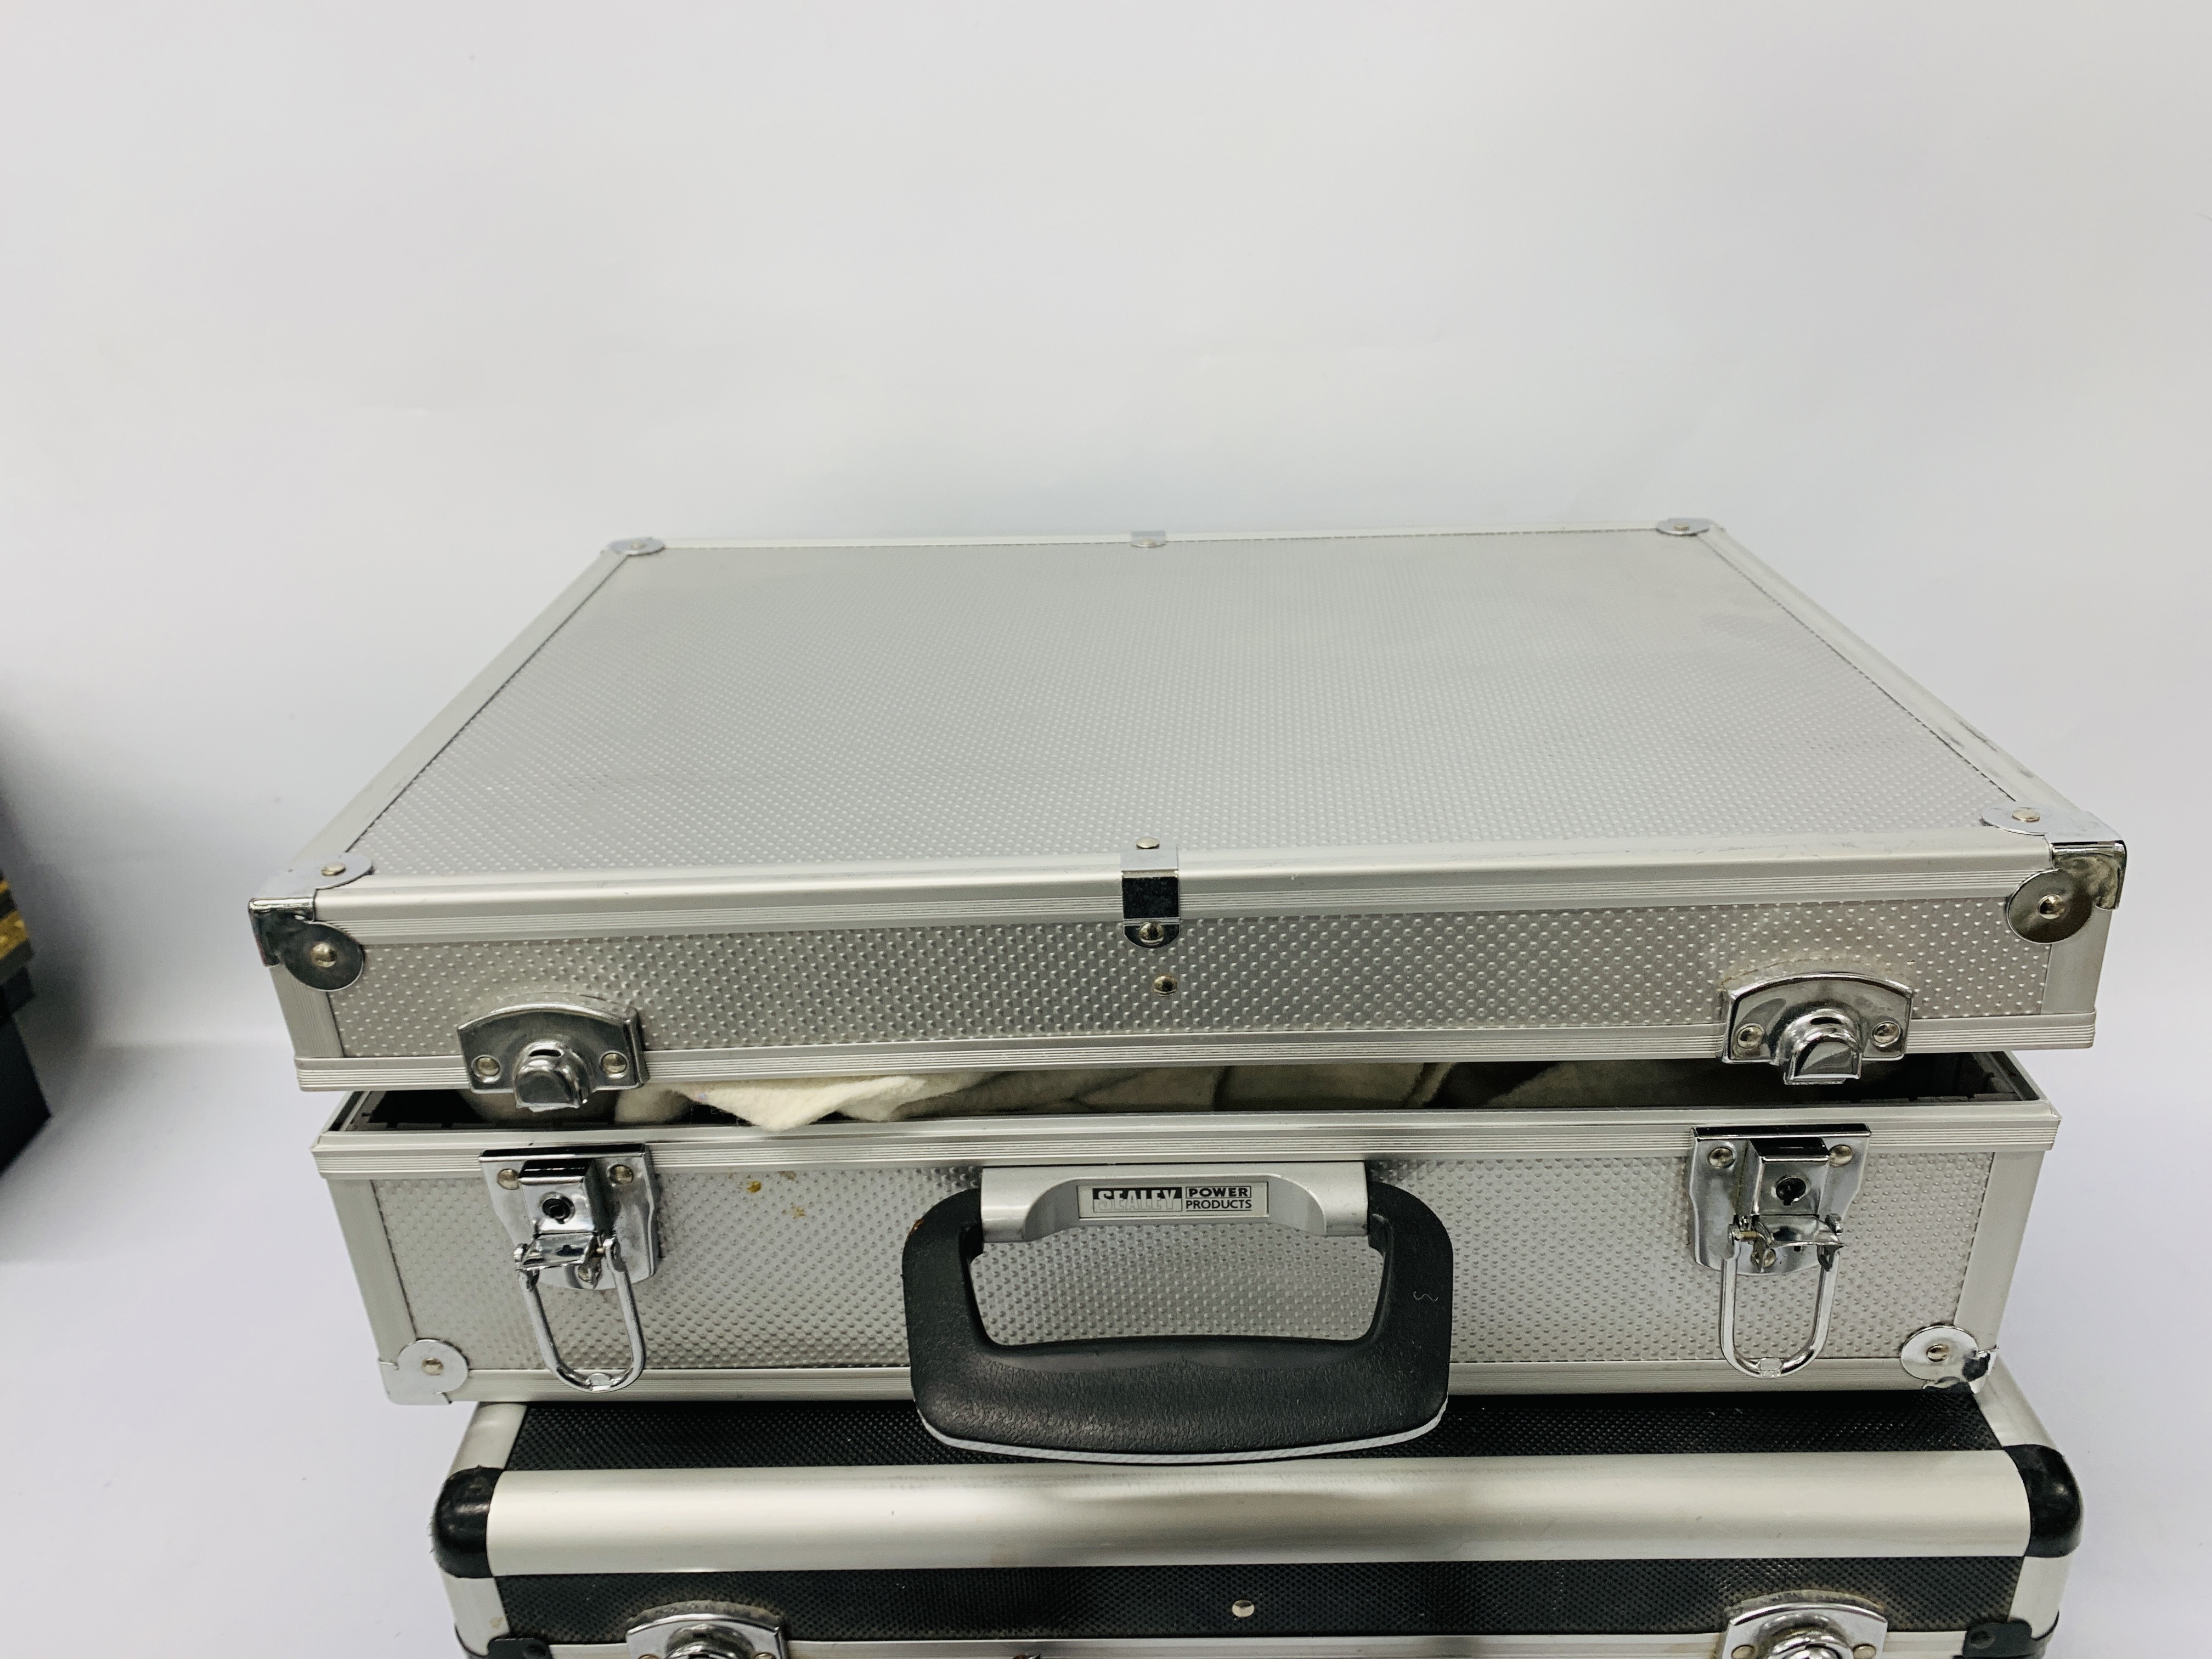 3 X SEALEY ALUMINIUM FLIGHT CASES ALONG WITH SMALL COLLECTION OF STAGE PROPS - Image 6 of 7